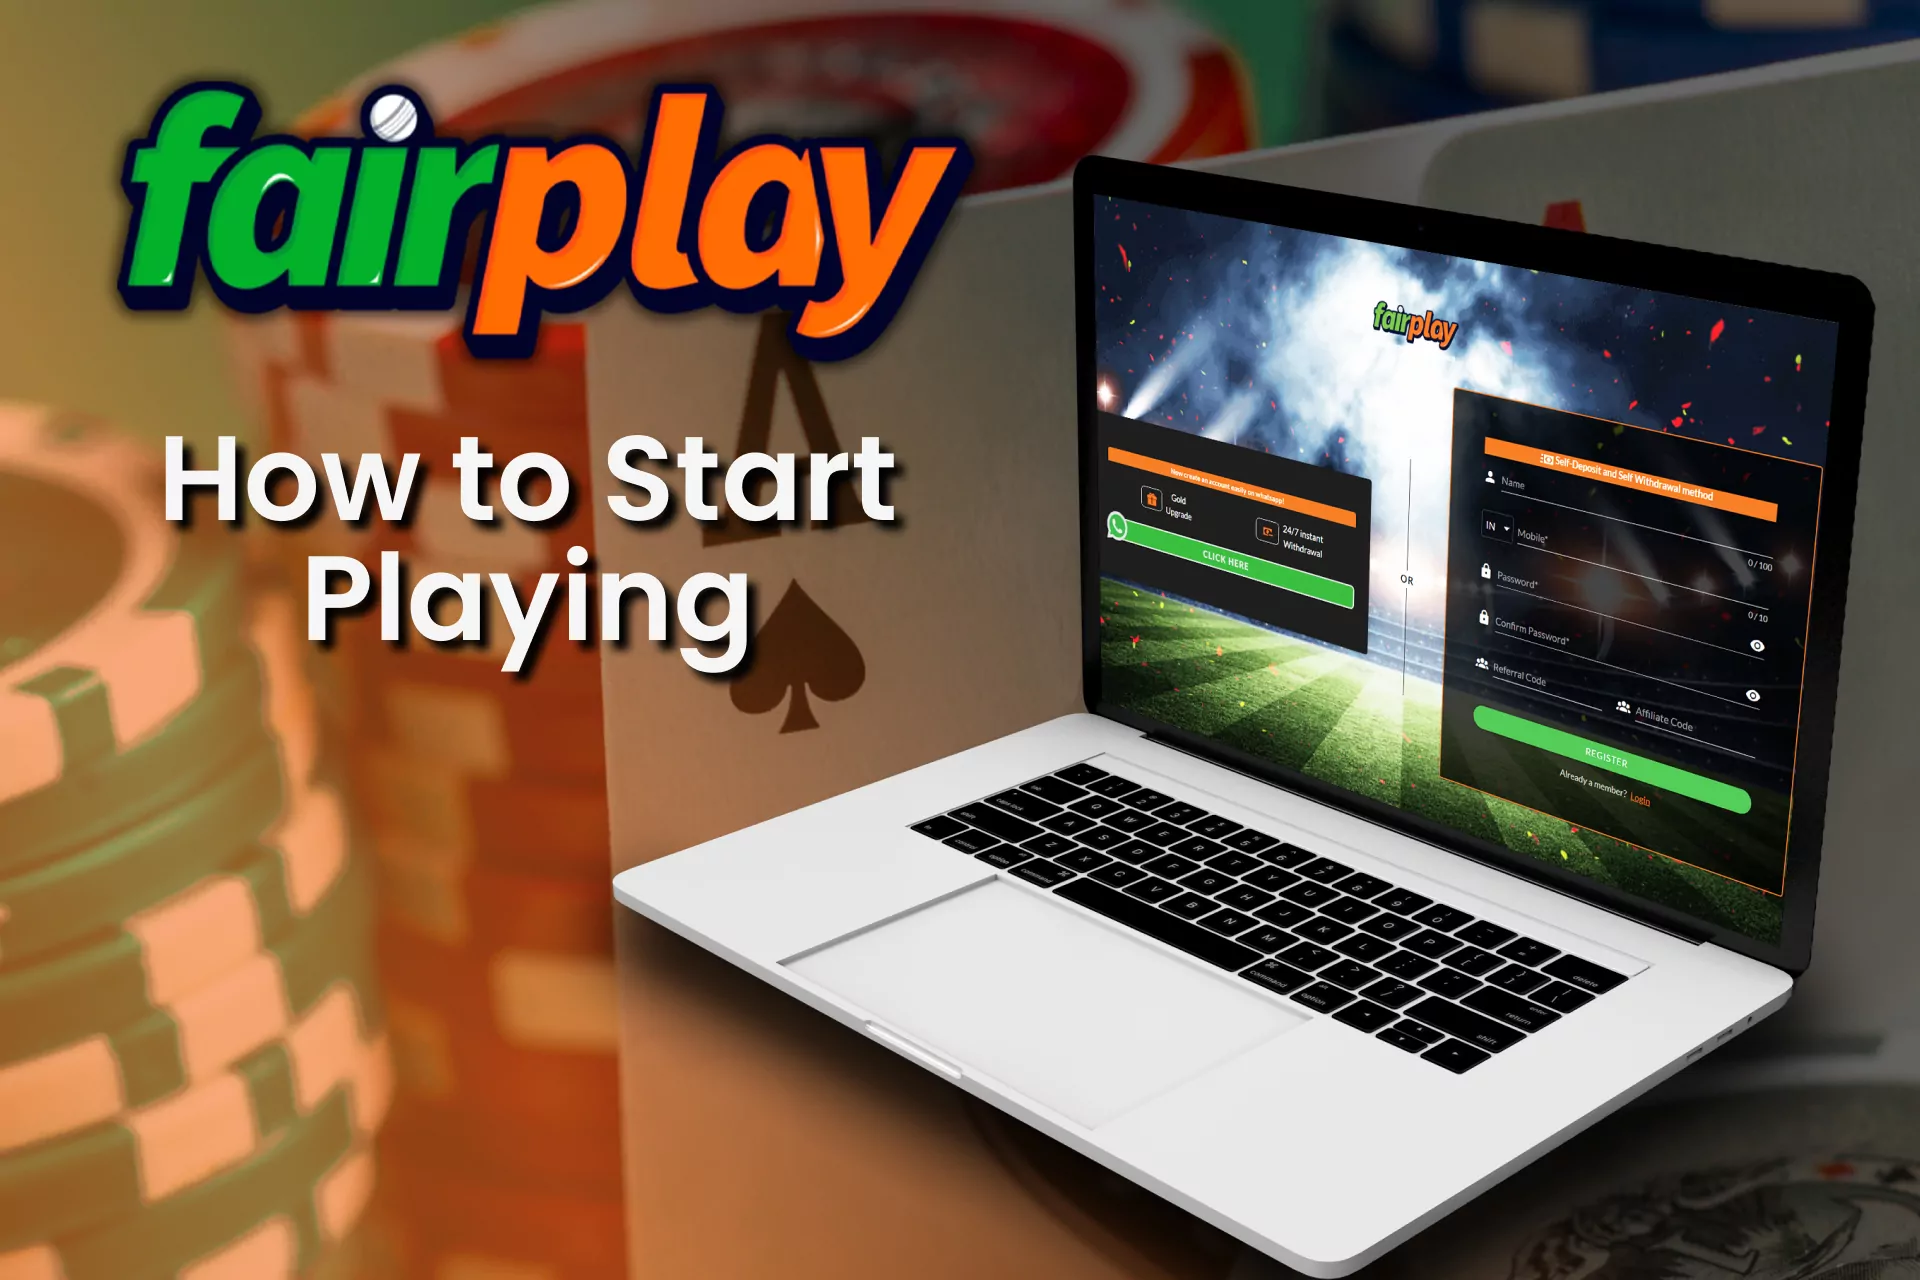 Go to the right section to start playing at Fairplay casino.